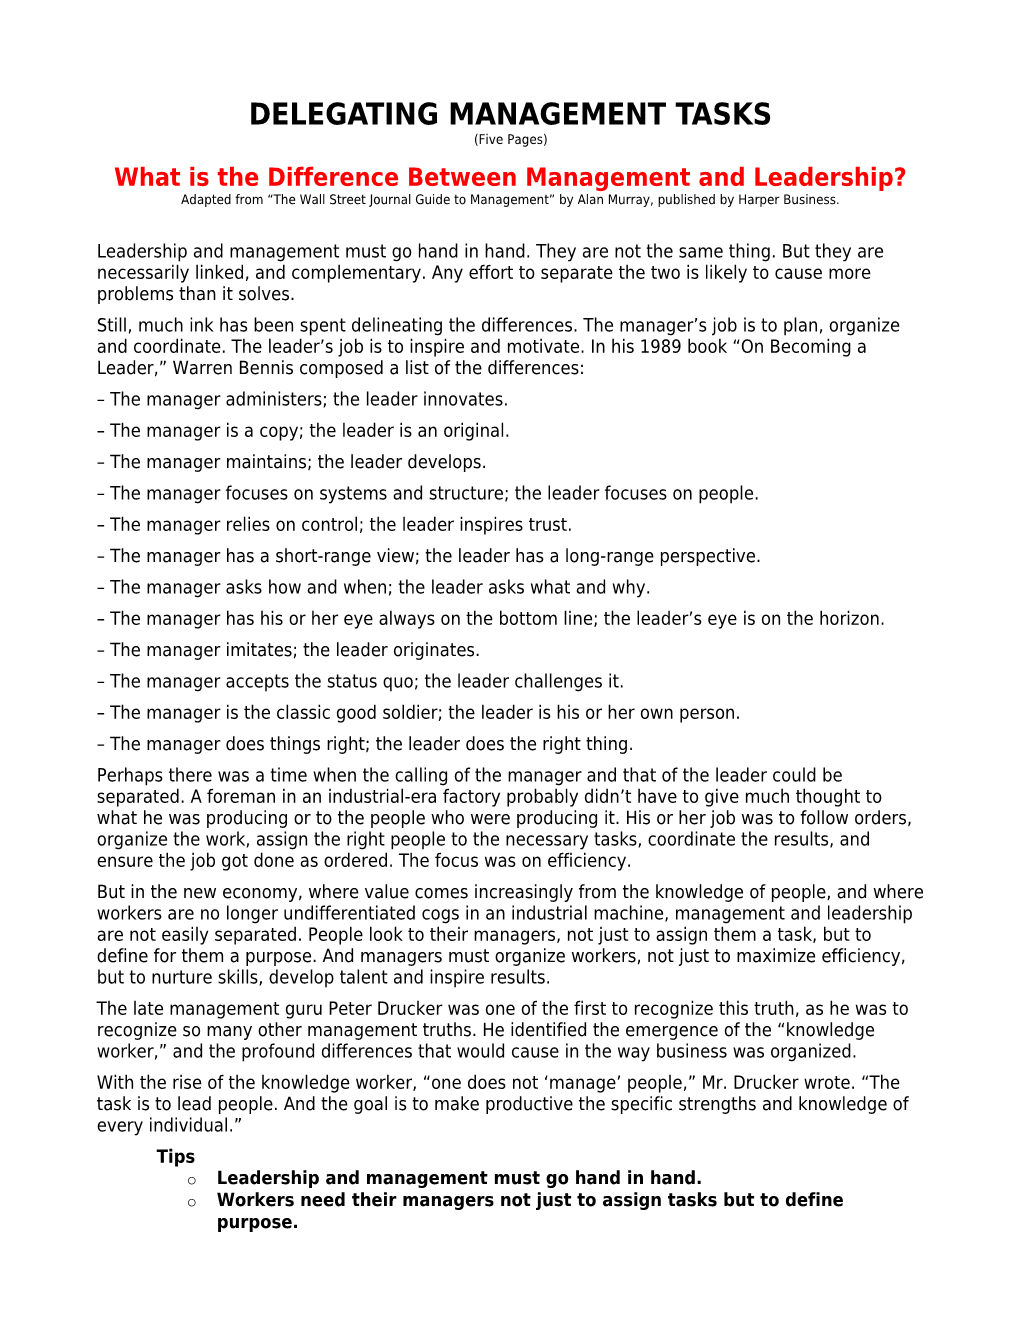 What Is the Difference Between Management and Leadership?